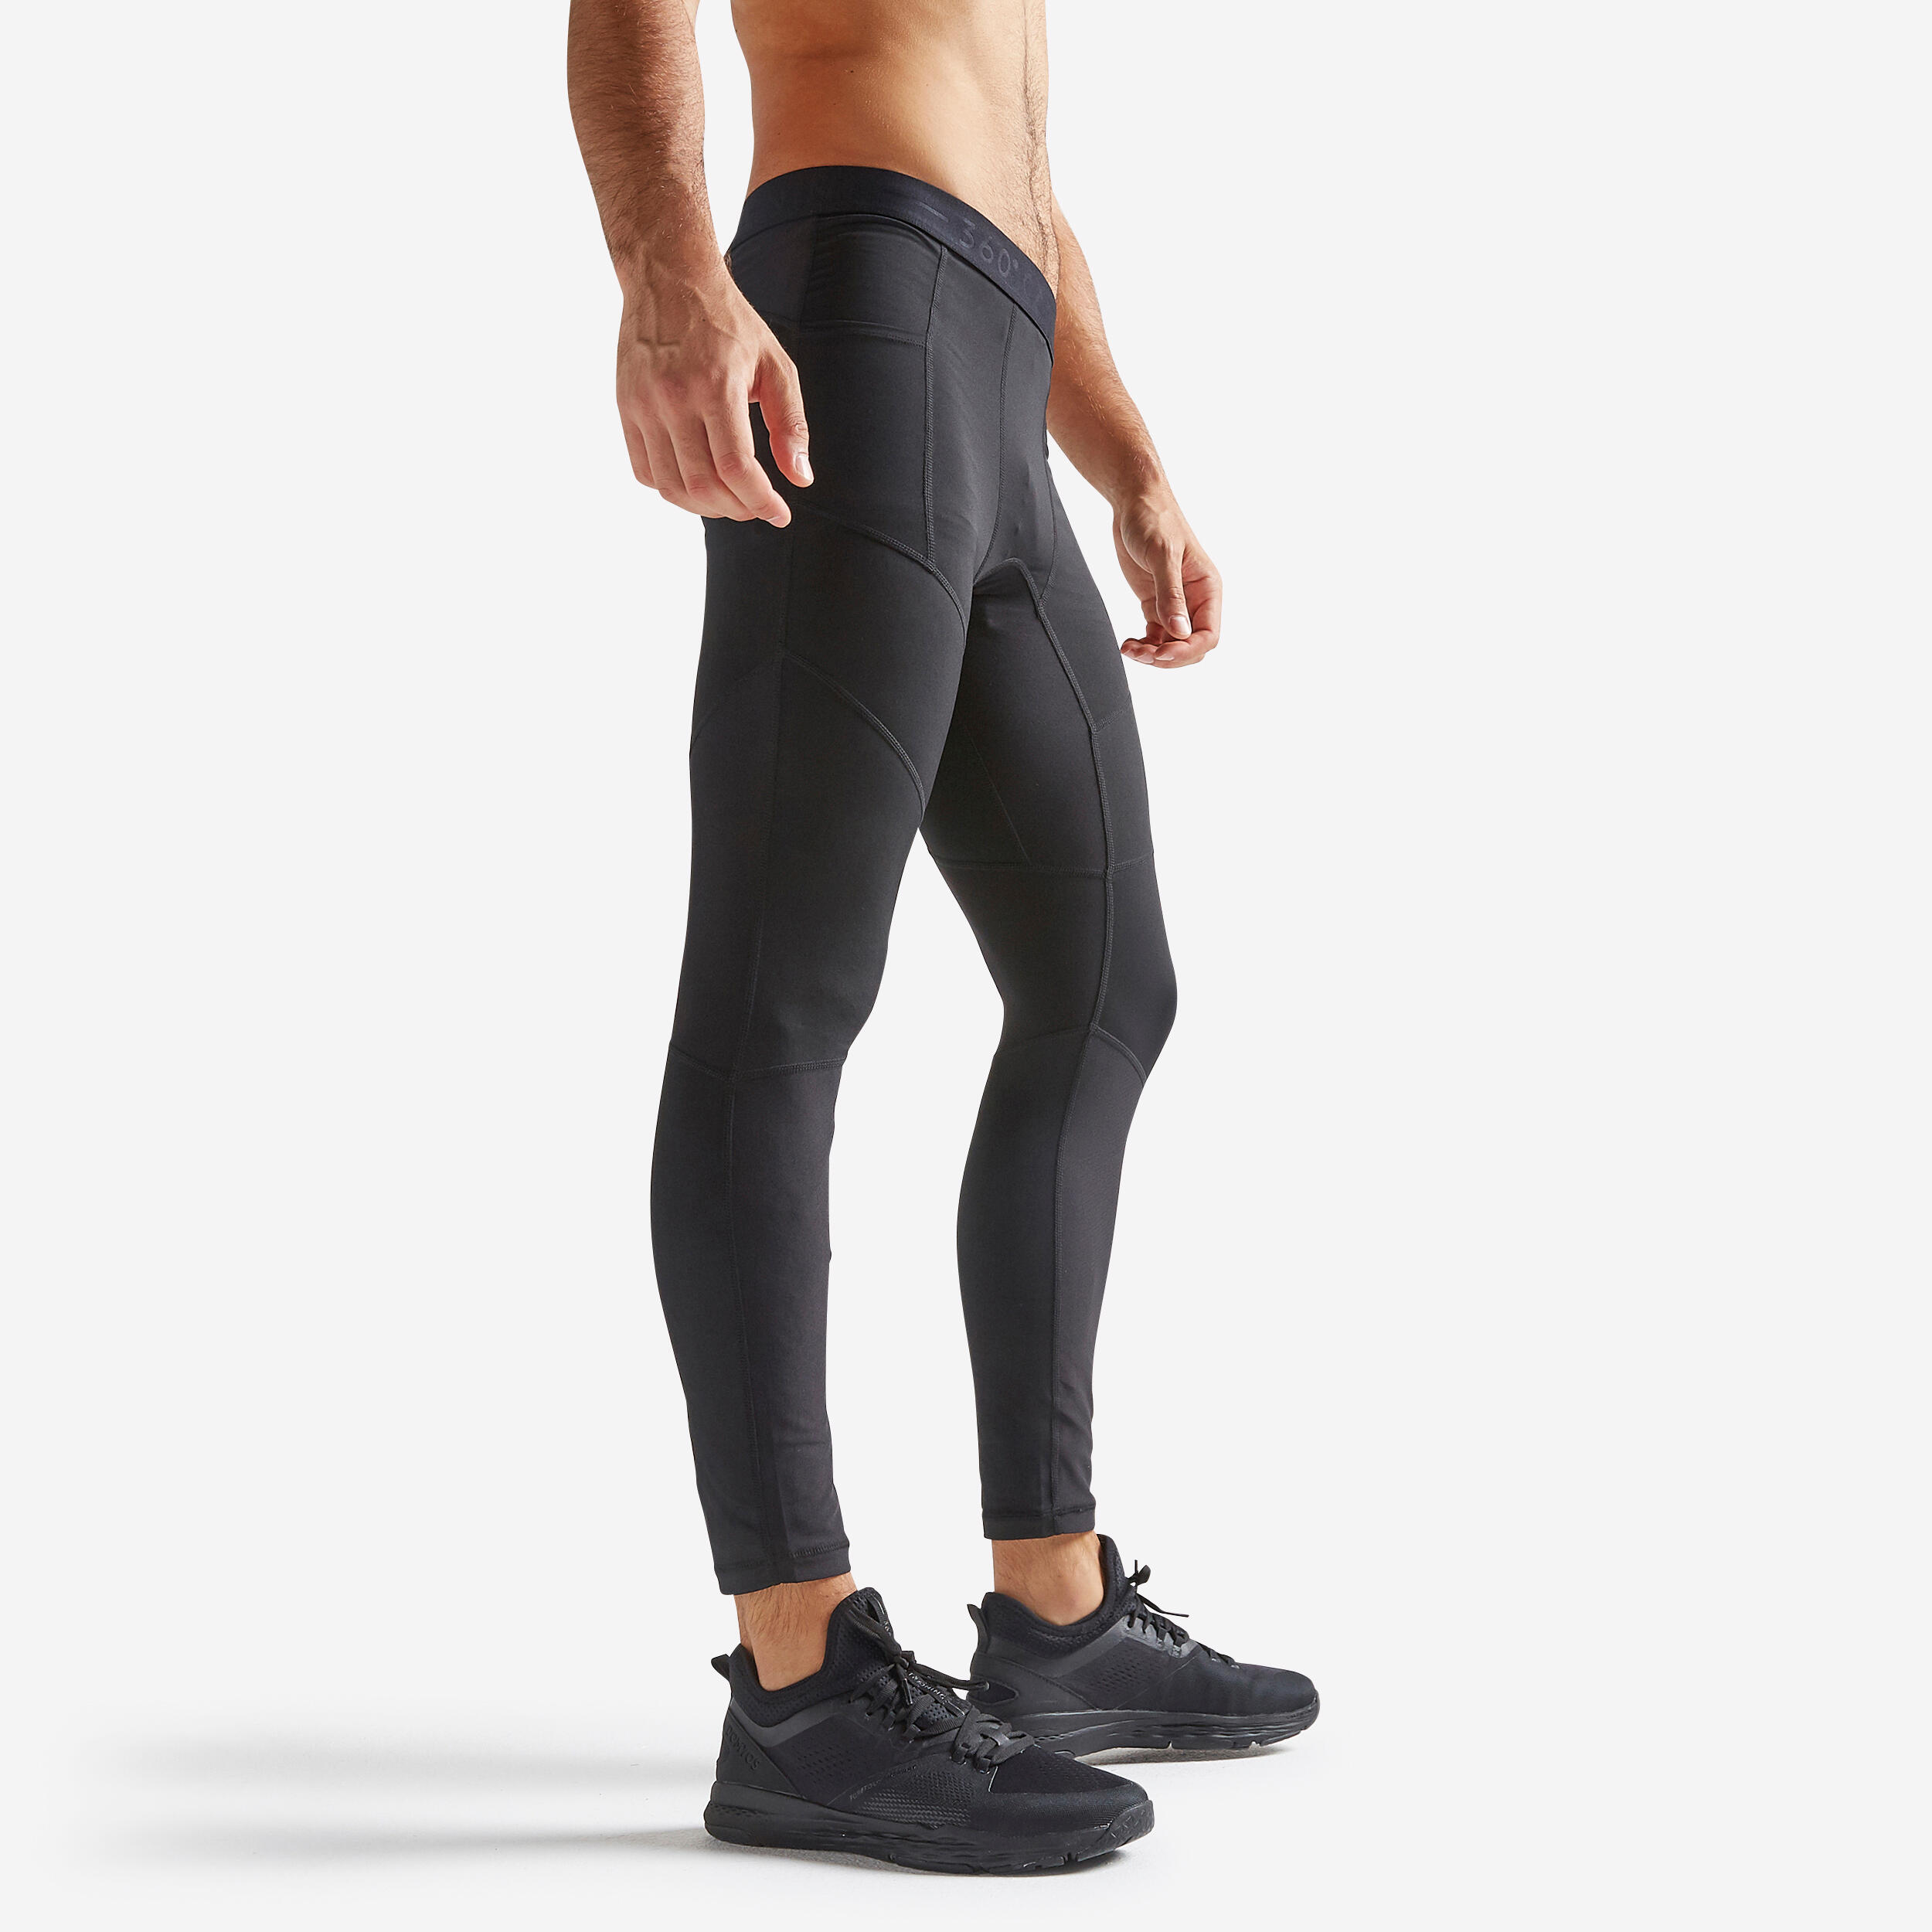 Men’s Breathable Fitness Tights - 500 Black